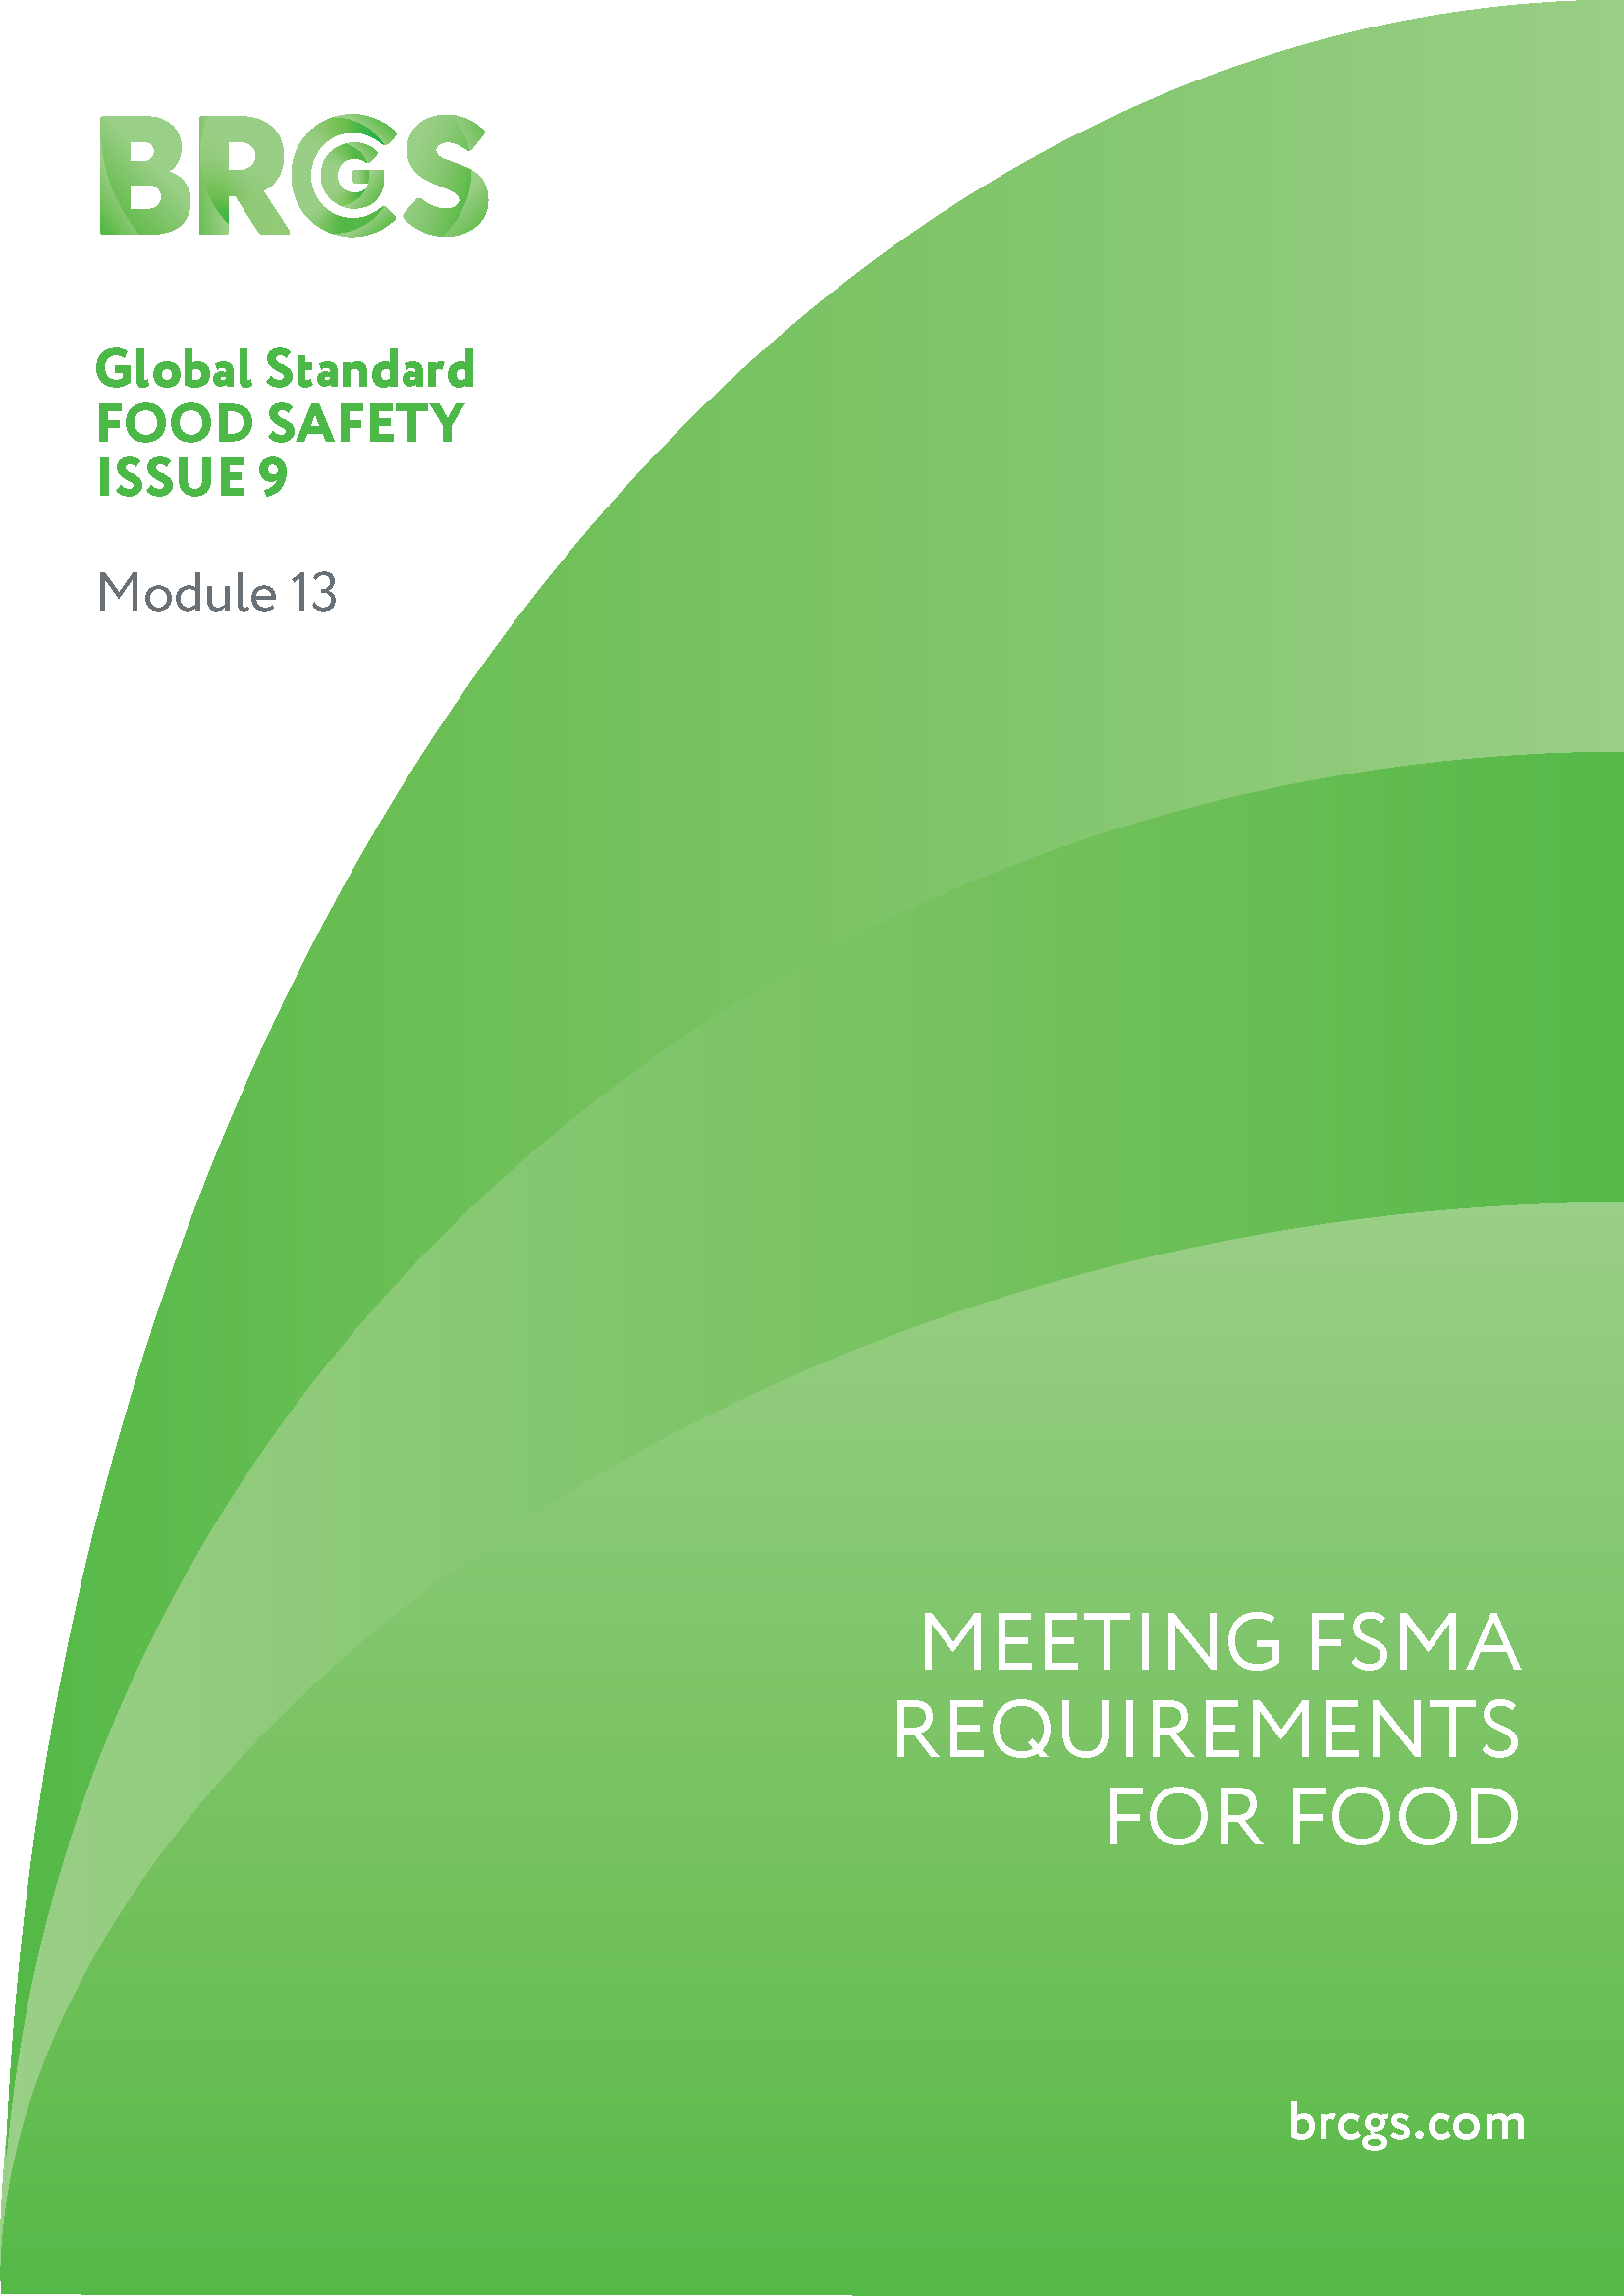 Module 13: Meeting FSMA Requirements for Food